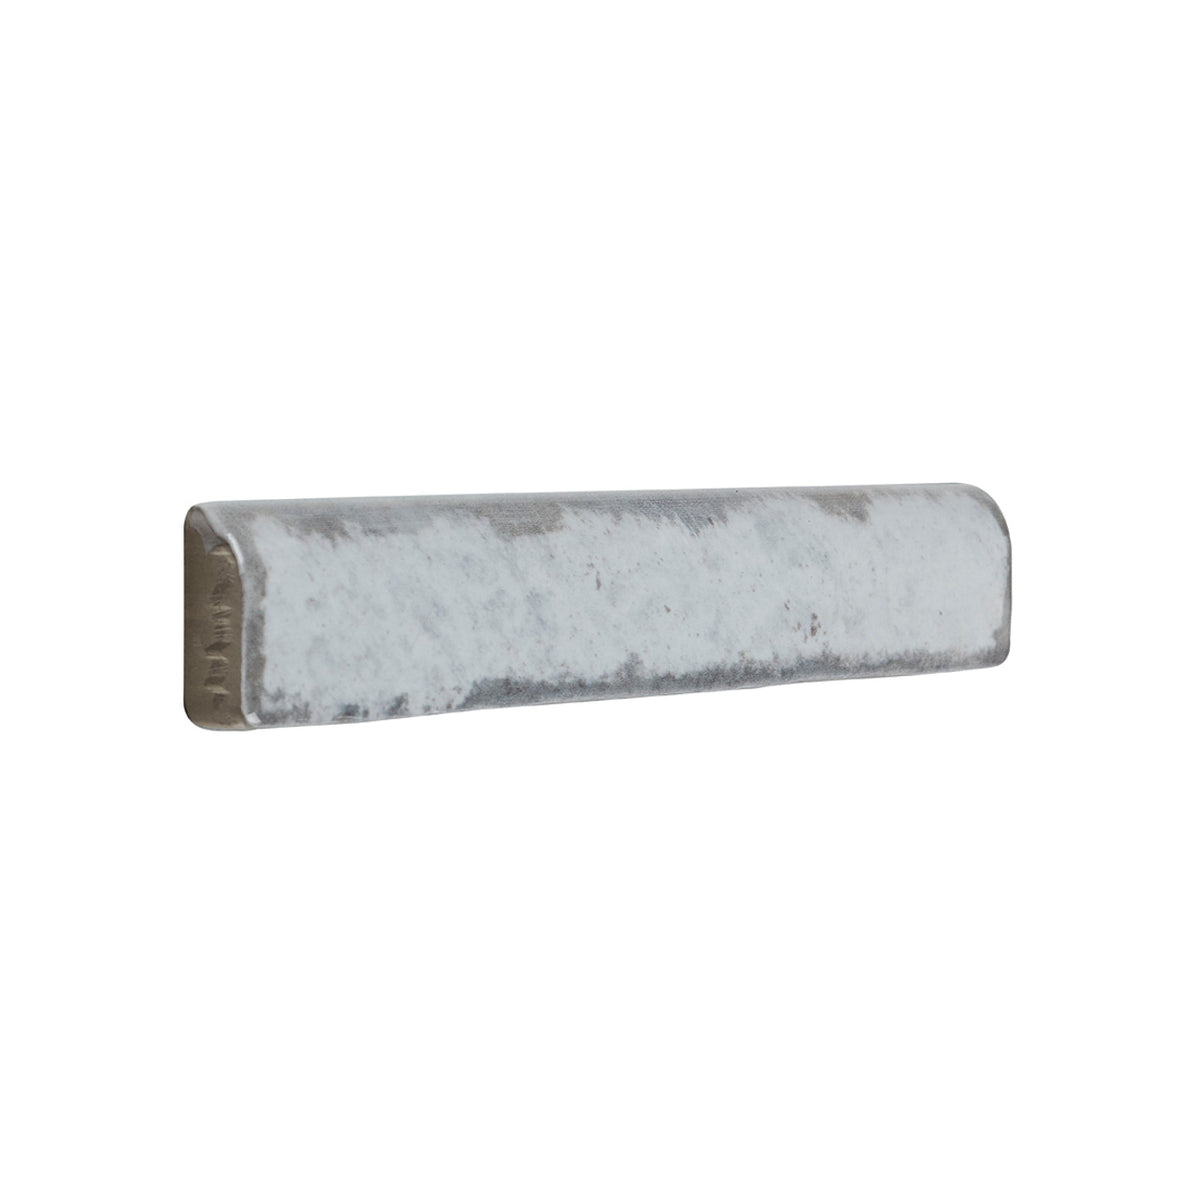 Lungarno Ceramics - Retrospectives 1 in. x 6 in. Bullnose - Enchanted Mist Side View